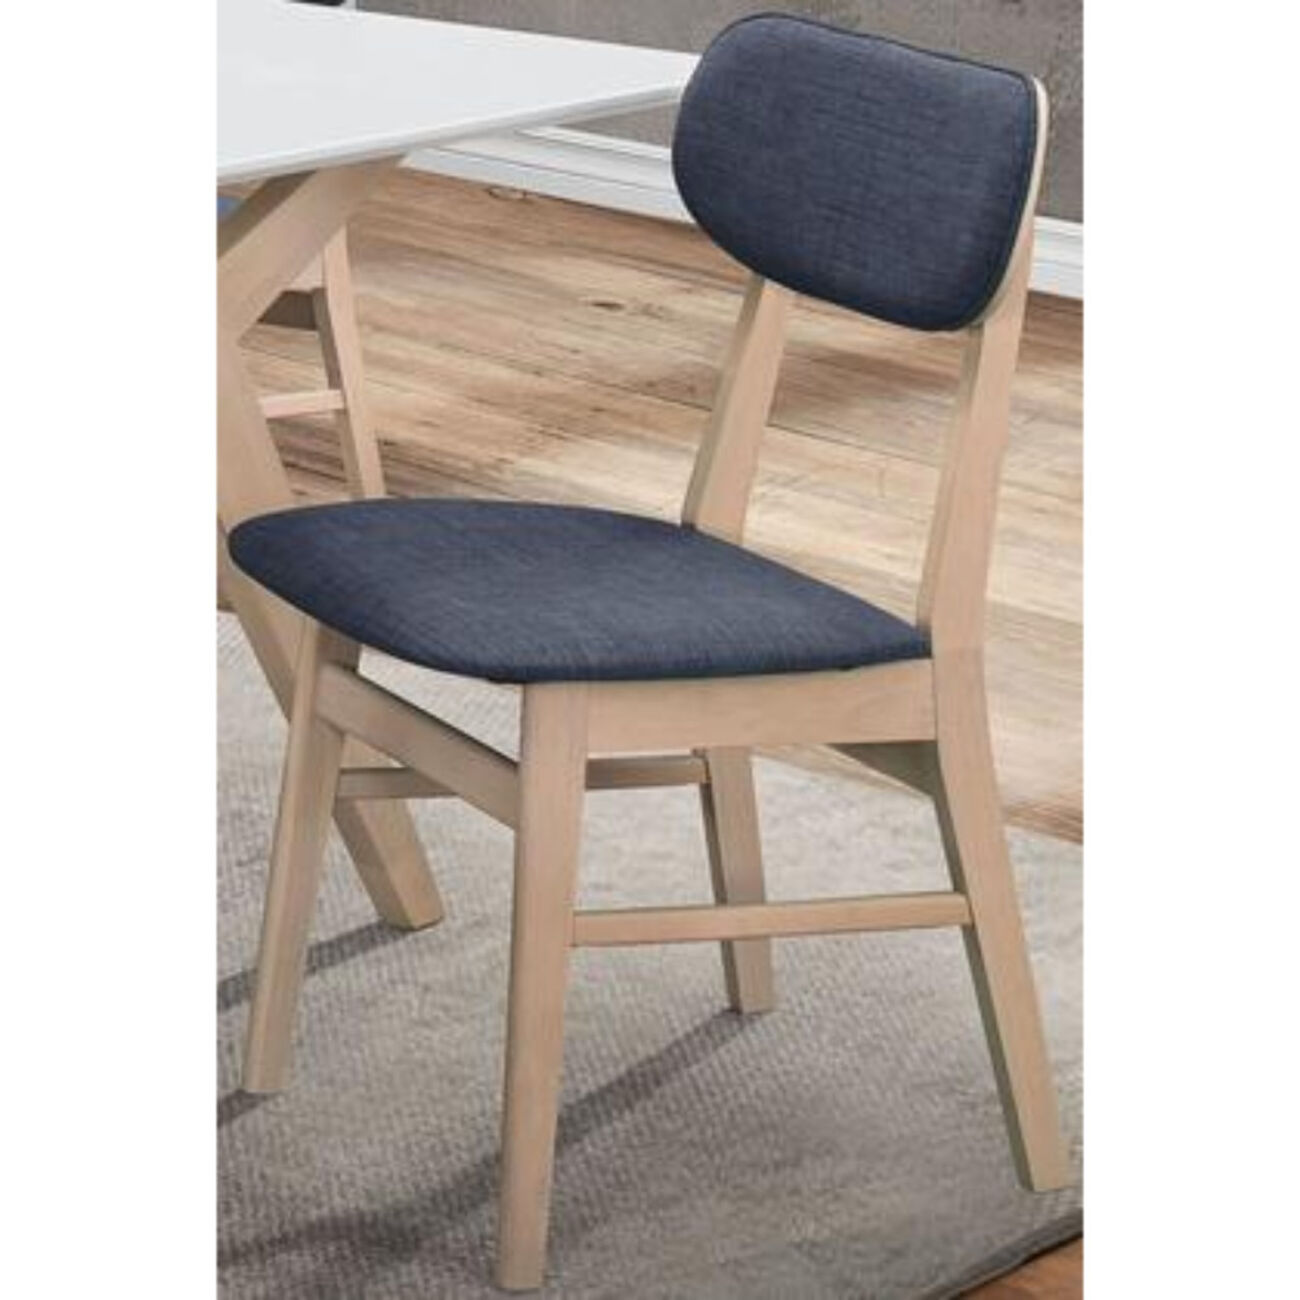 Fabric Upholstered Wooden Dining Side Chair, Set of 2, Blue and Beige